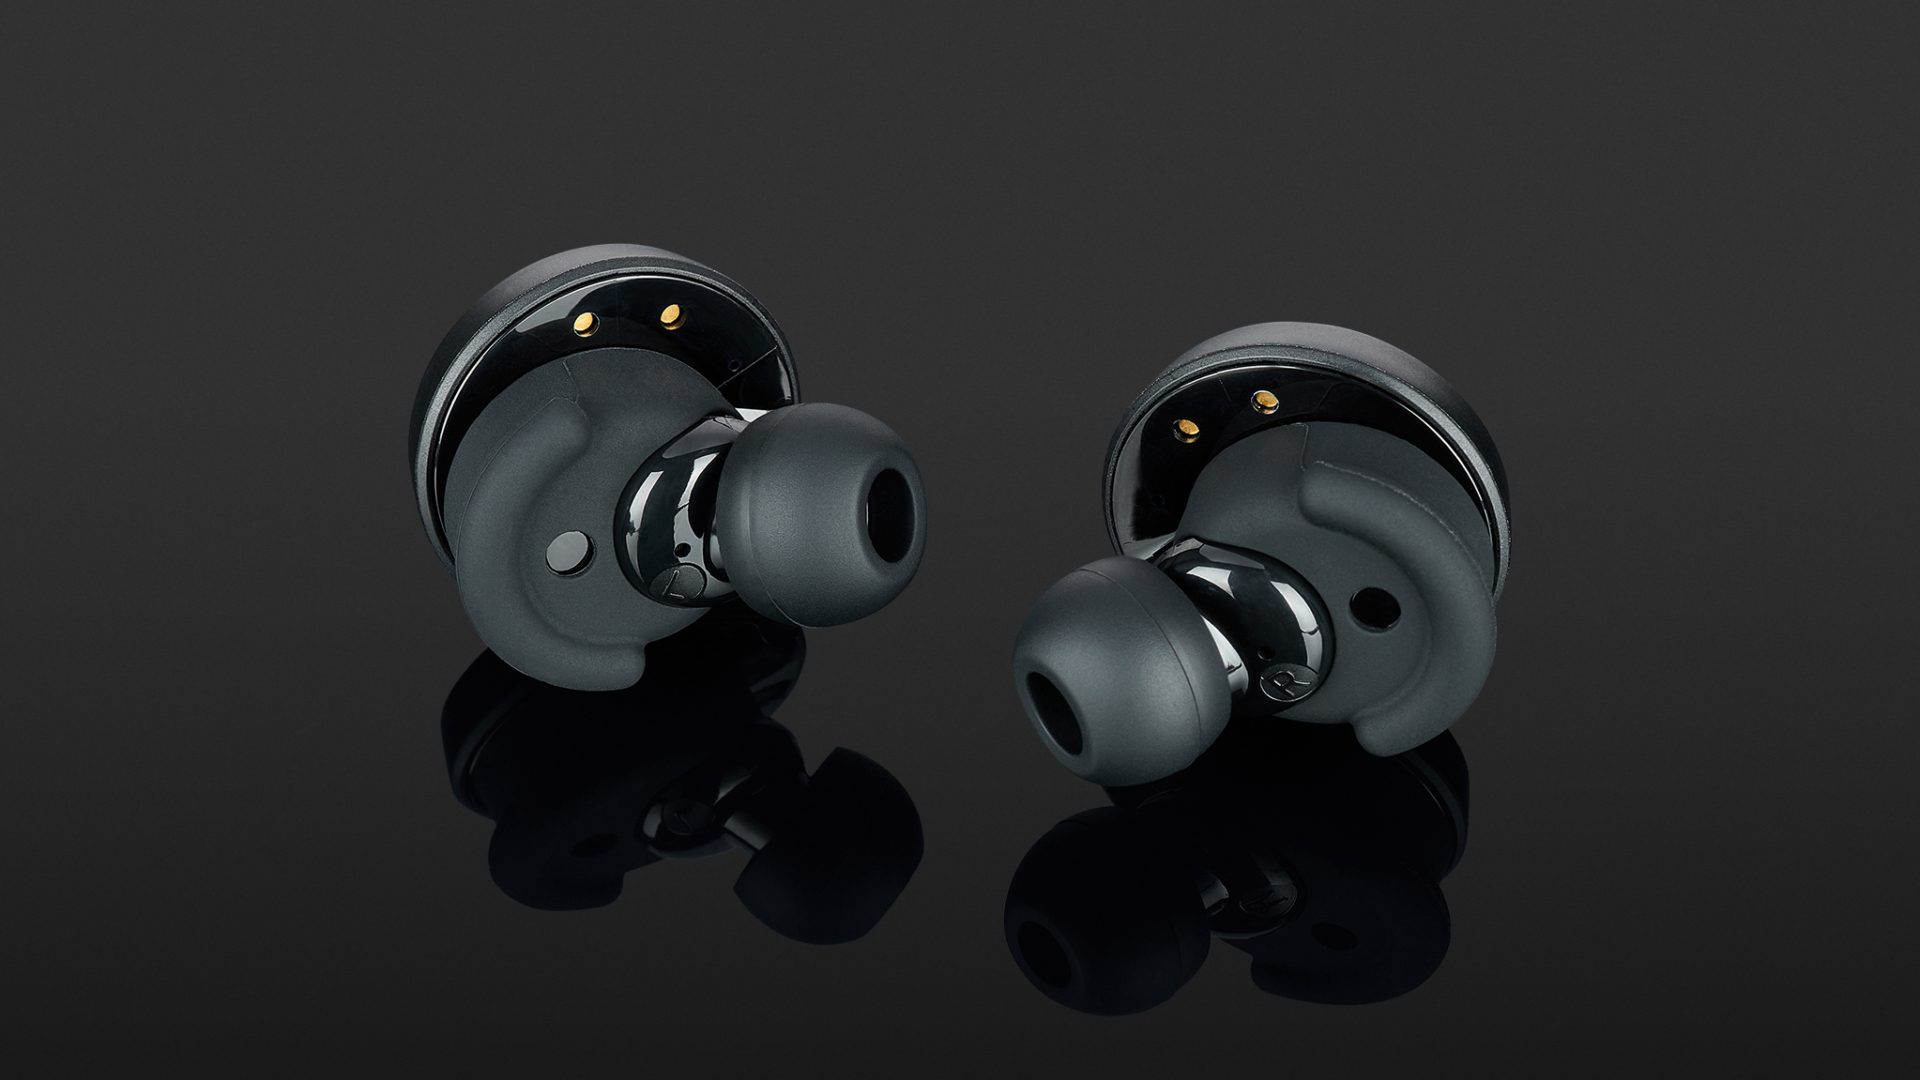 The NuraTrue Pro are the first wireless earphones to feature aptX